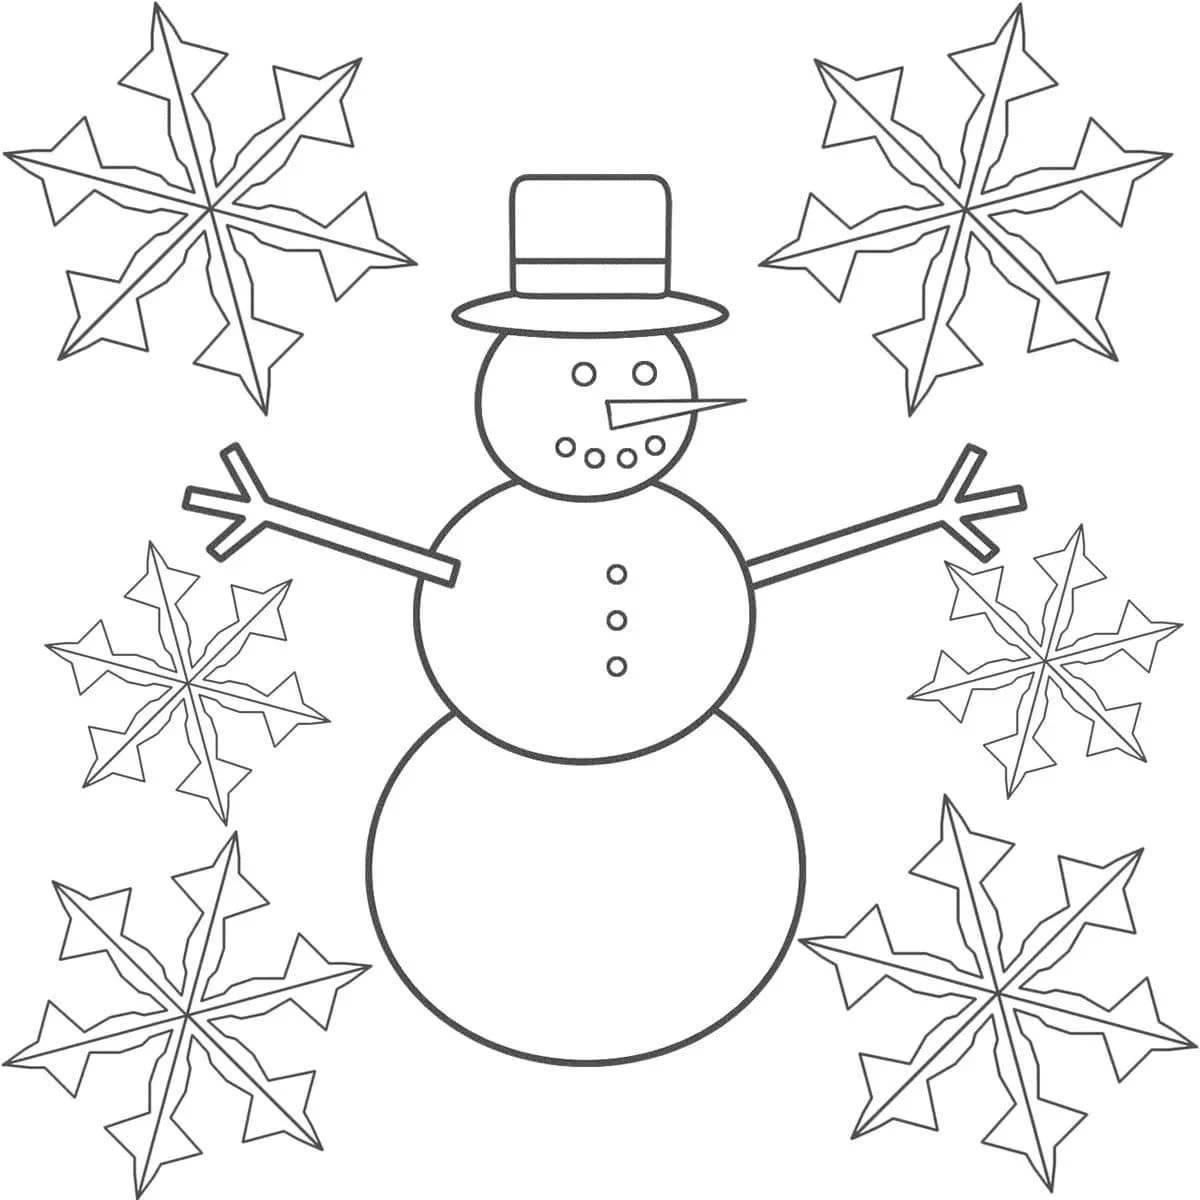 Colorful snowman coloring book for children 4-5 years old